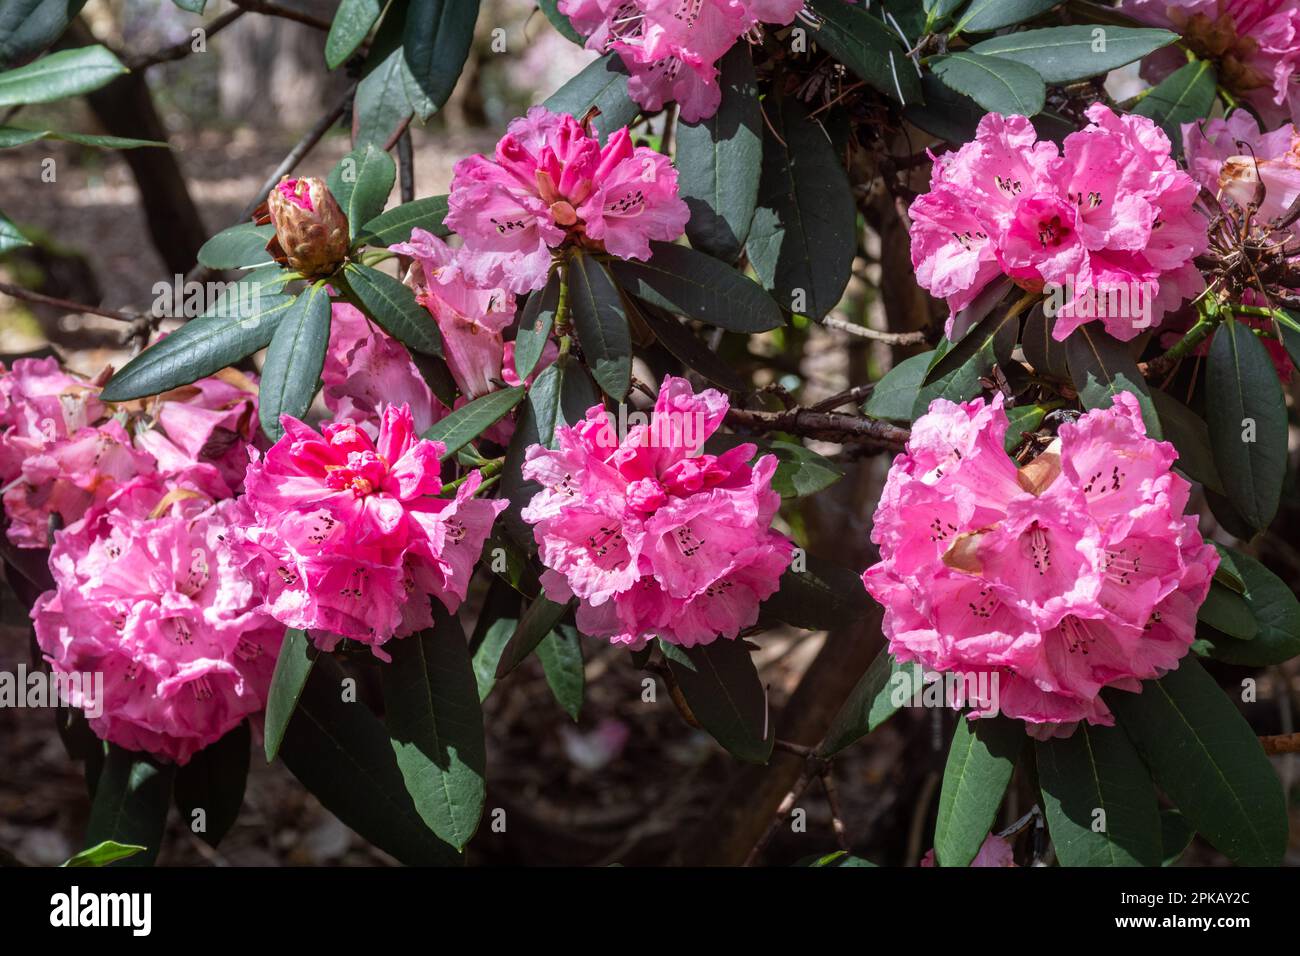 Pink flowers or blooms of Rhododendron tanastylum var. pennivenium in Spring or April, UK Stock Photo